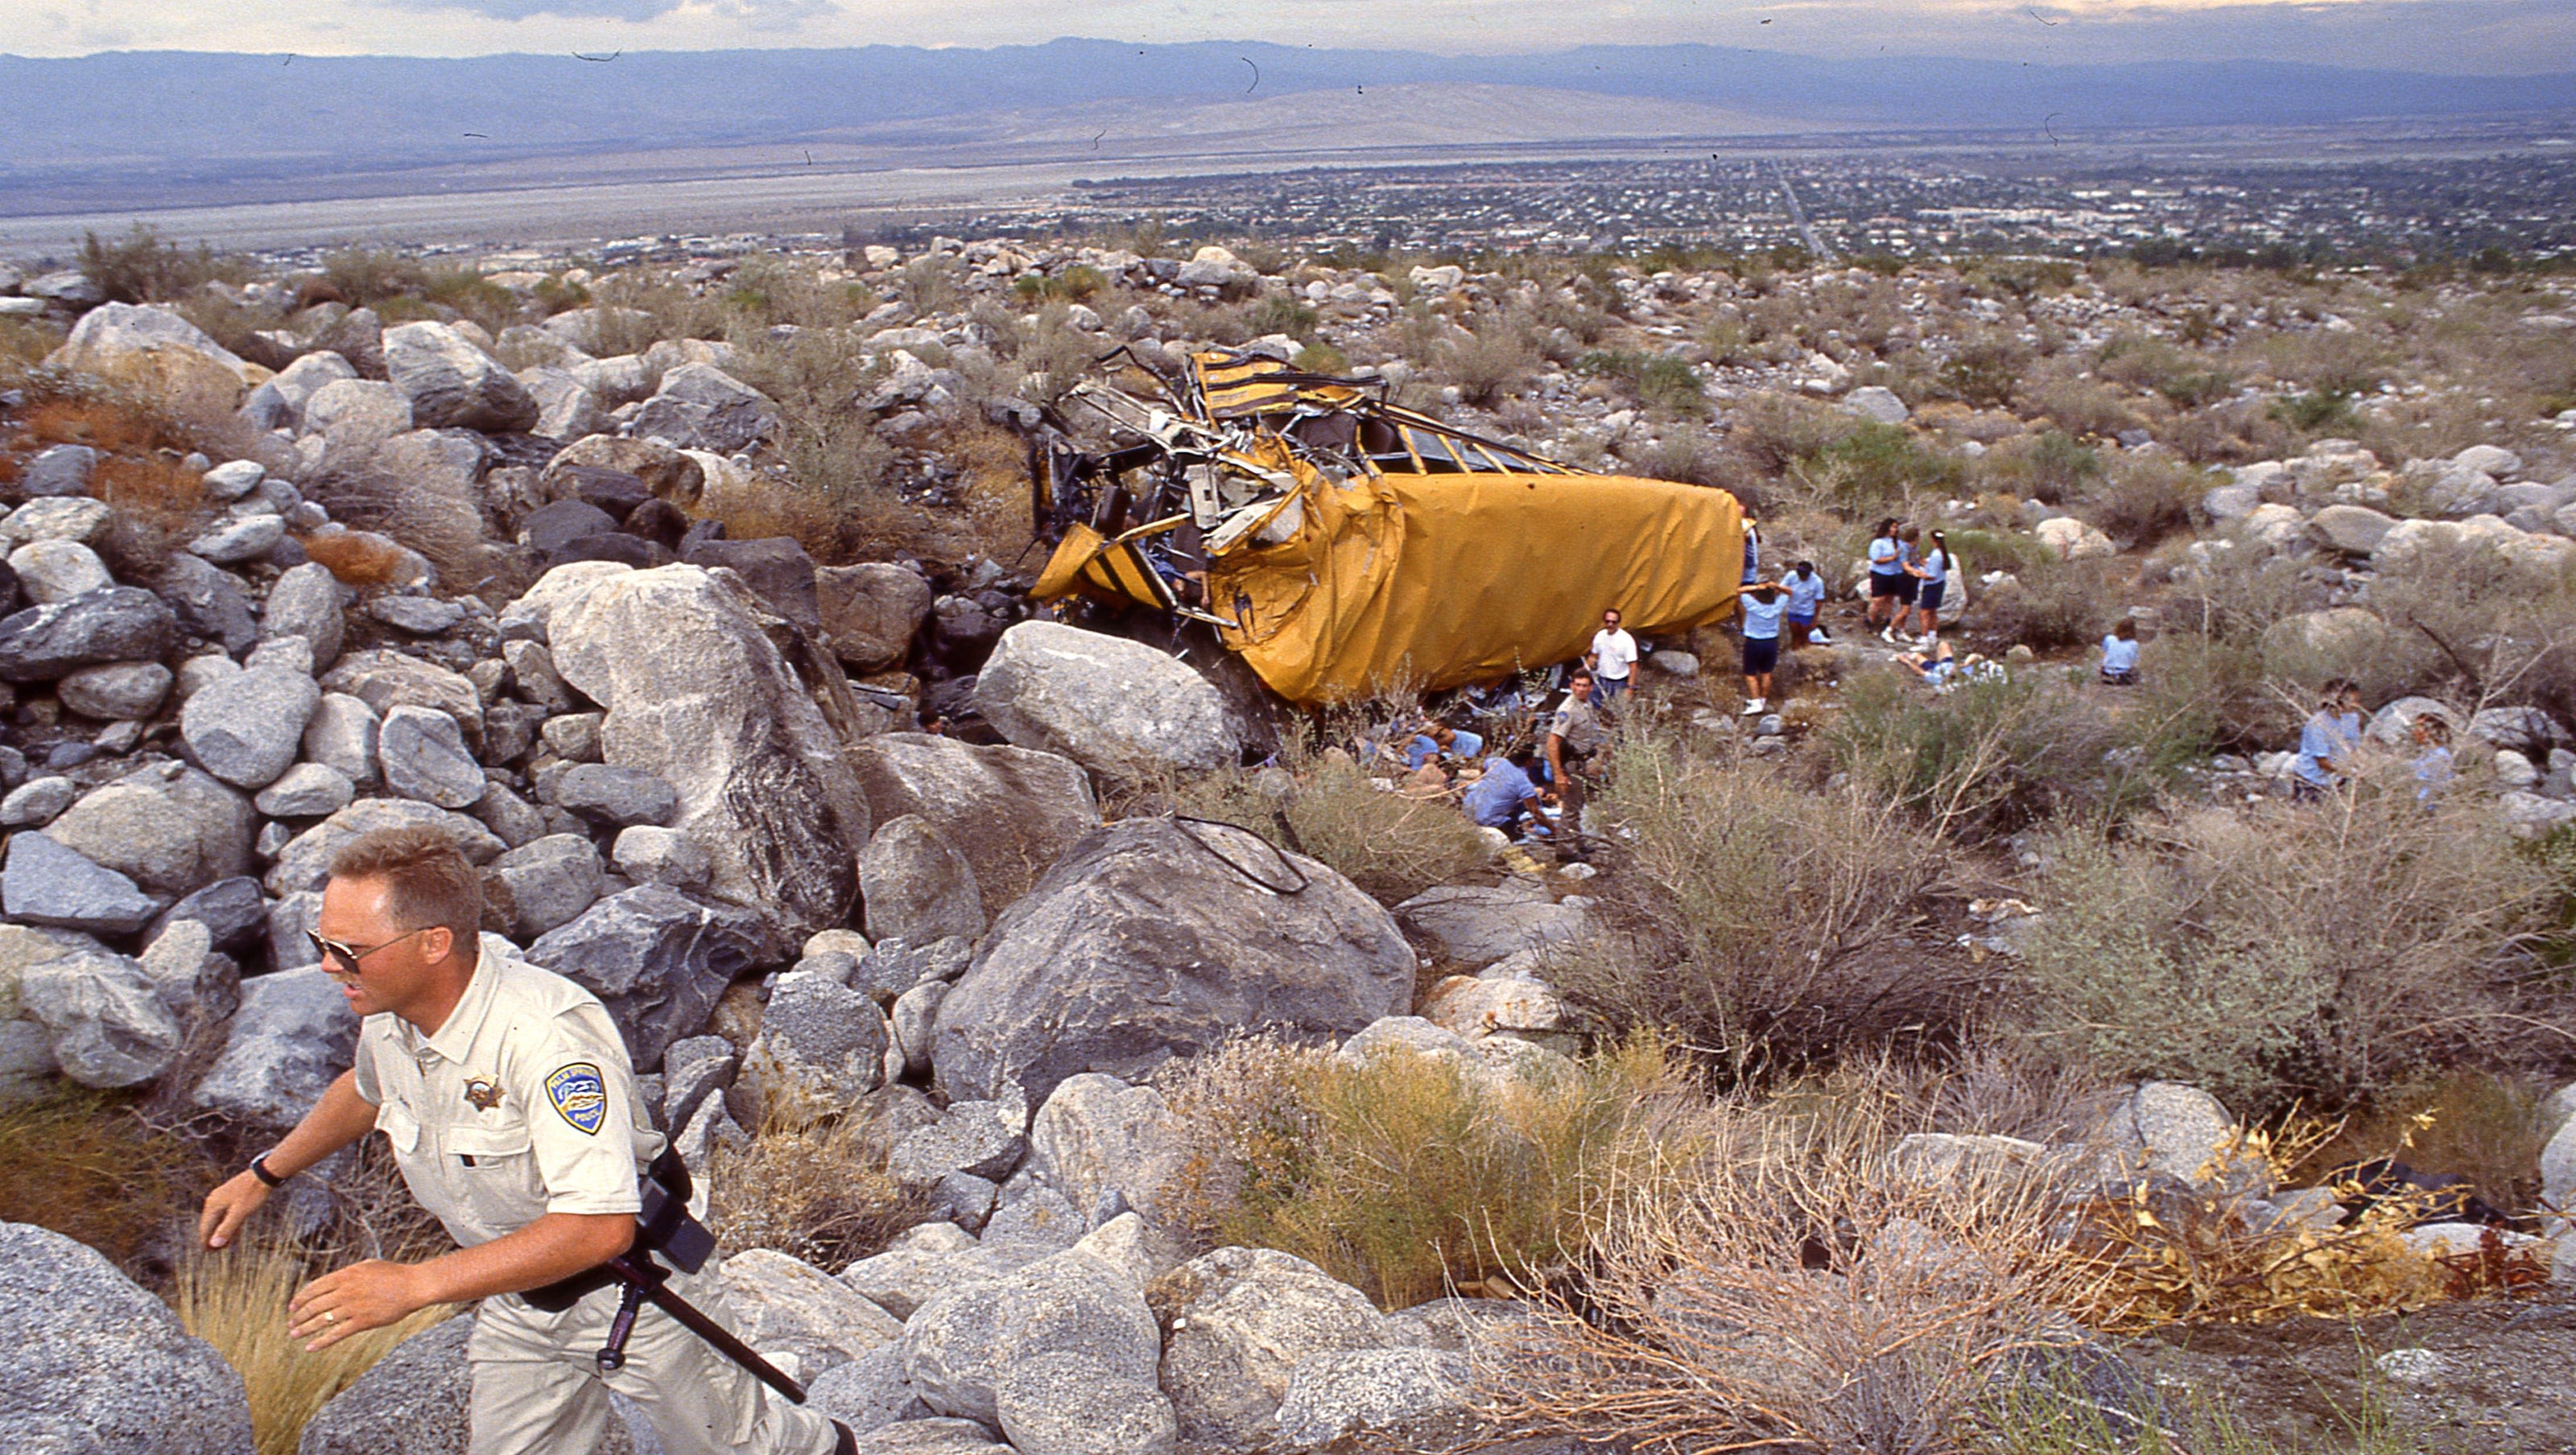 From the archive: Tragic 1991 Palm Springs Girl Scouts bus crash still haunts today